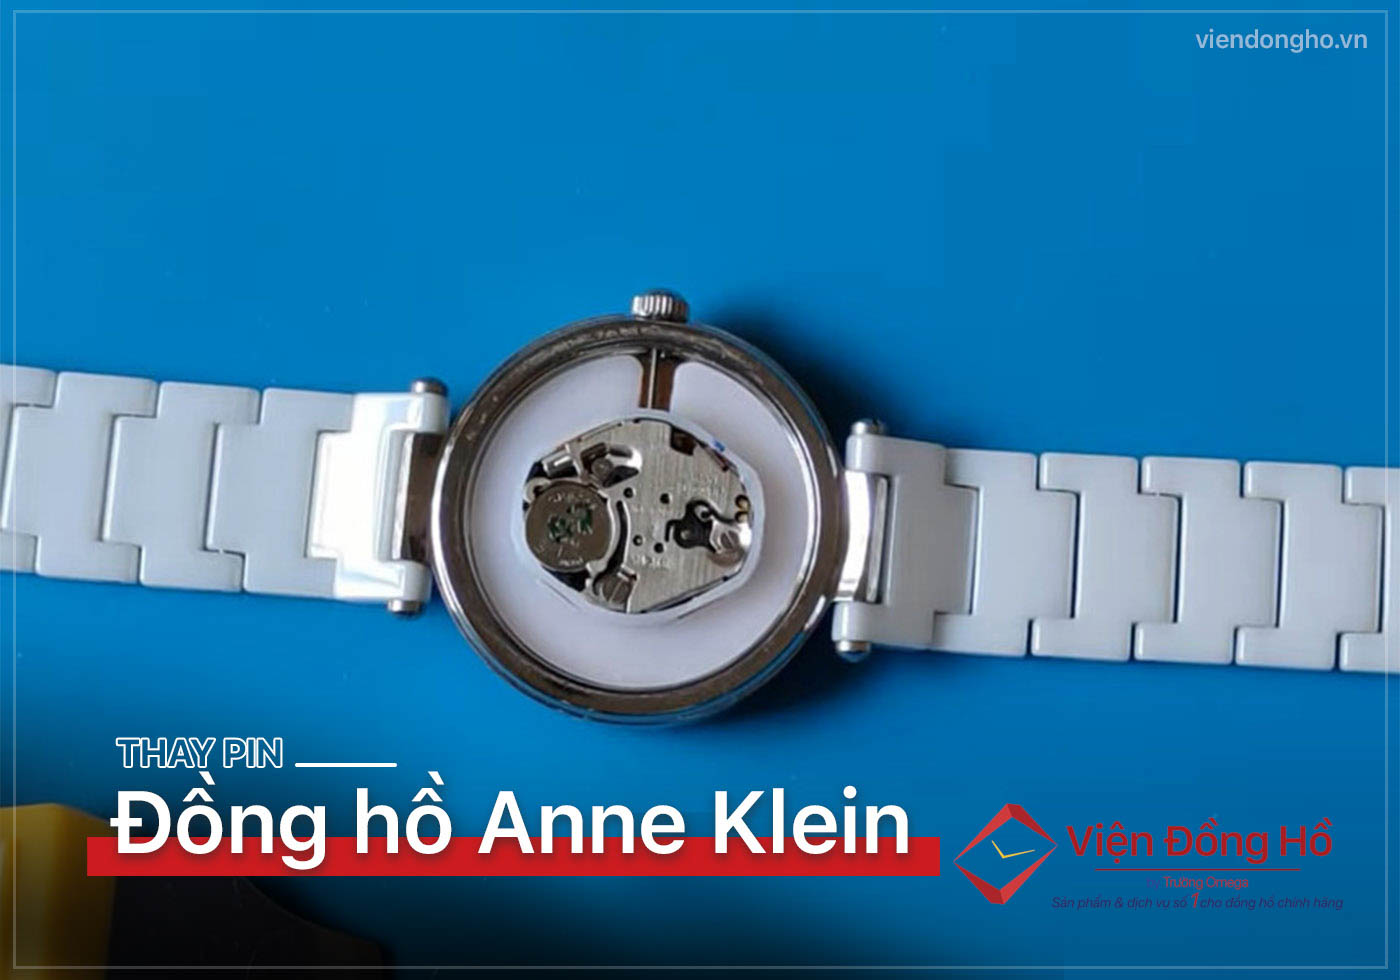 Thay pin dong ho Anne Klein 10